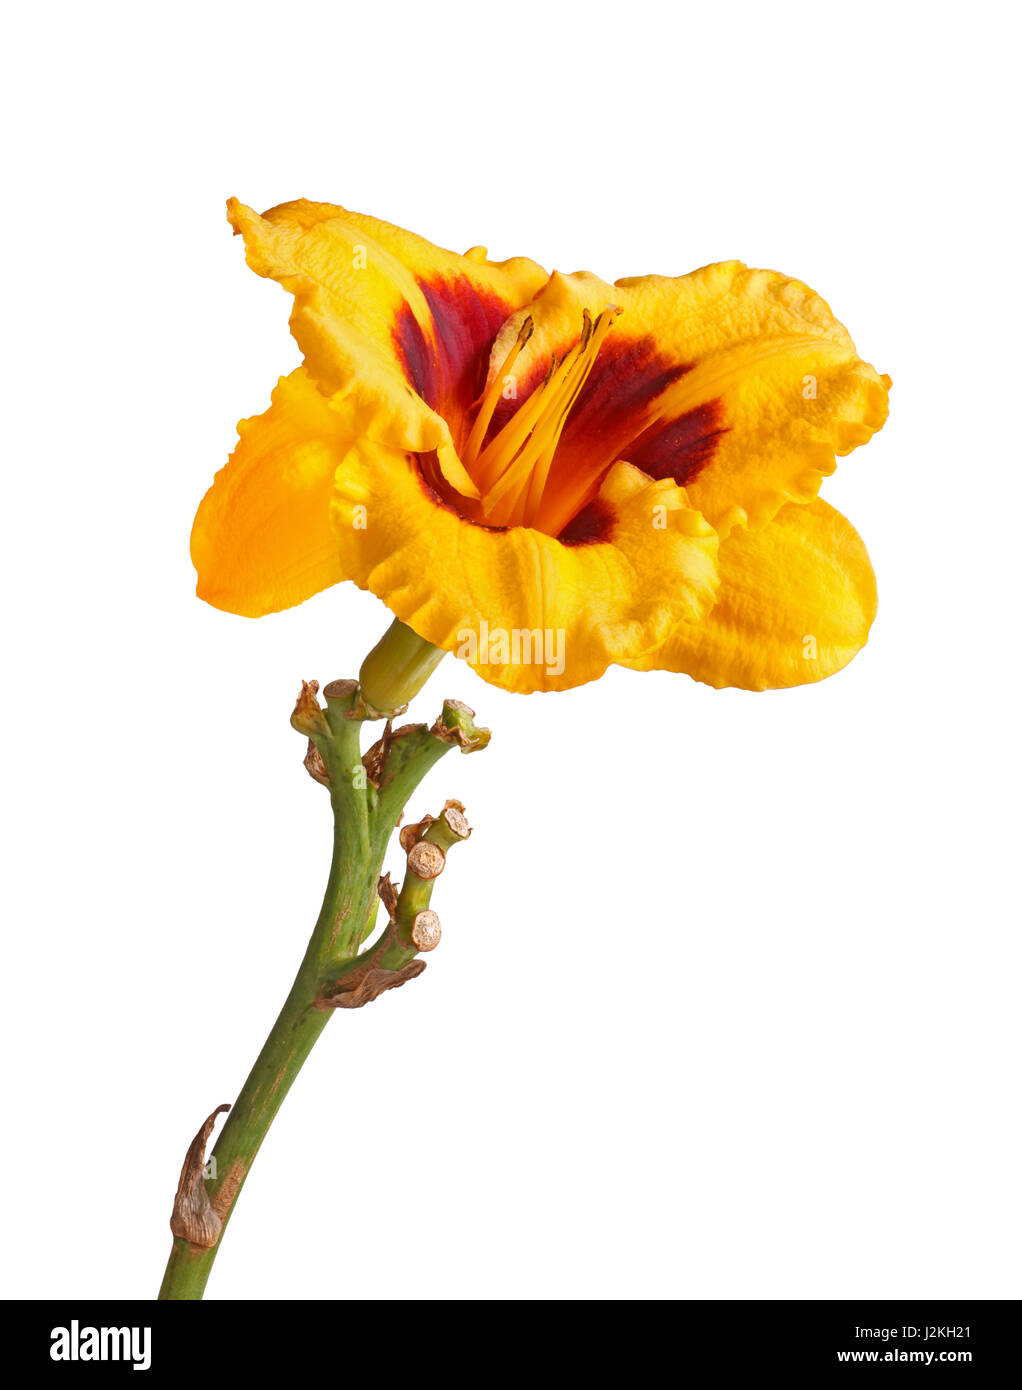 Single stem with a red and yellow flower of a daylily (Hemerocallis hybrid) isolated against a white background Stock Photo